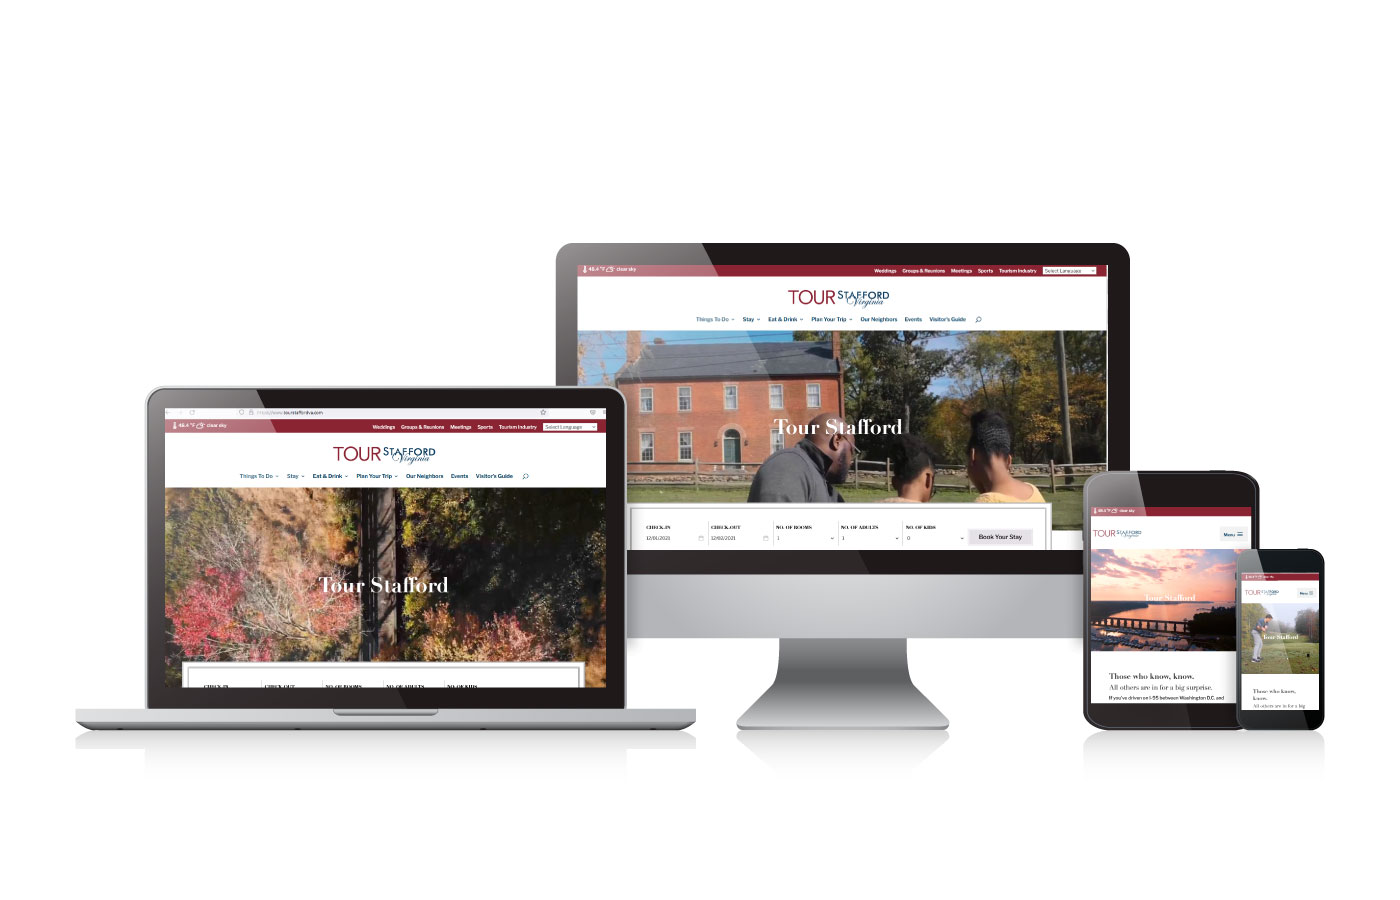 Stafford’s Tourism Department Successfully Launches New Website